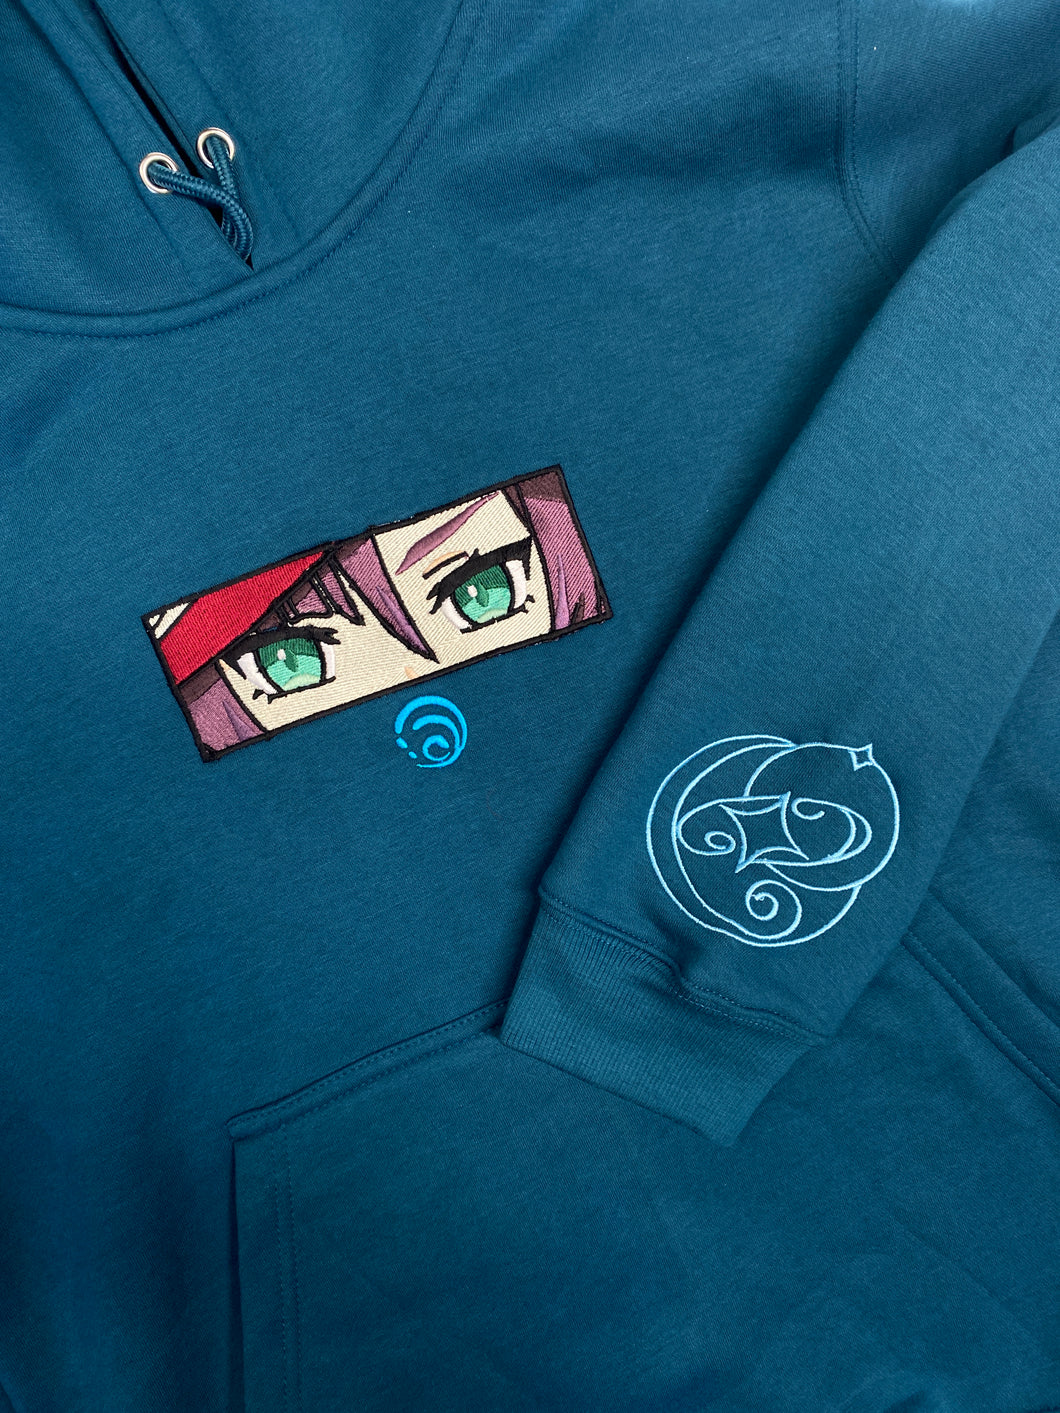 Mona Embroidered Teal Blue Hoodie